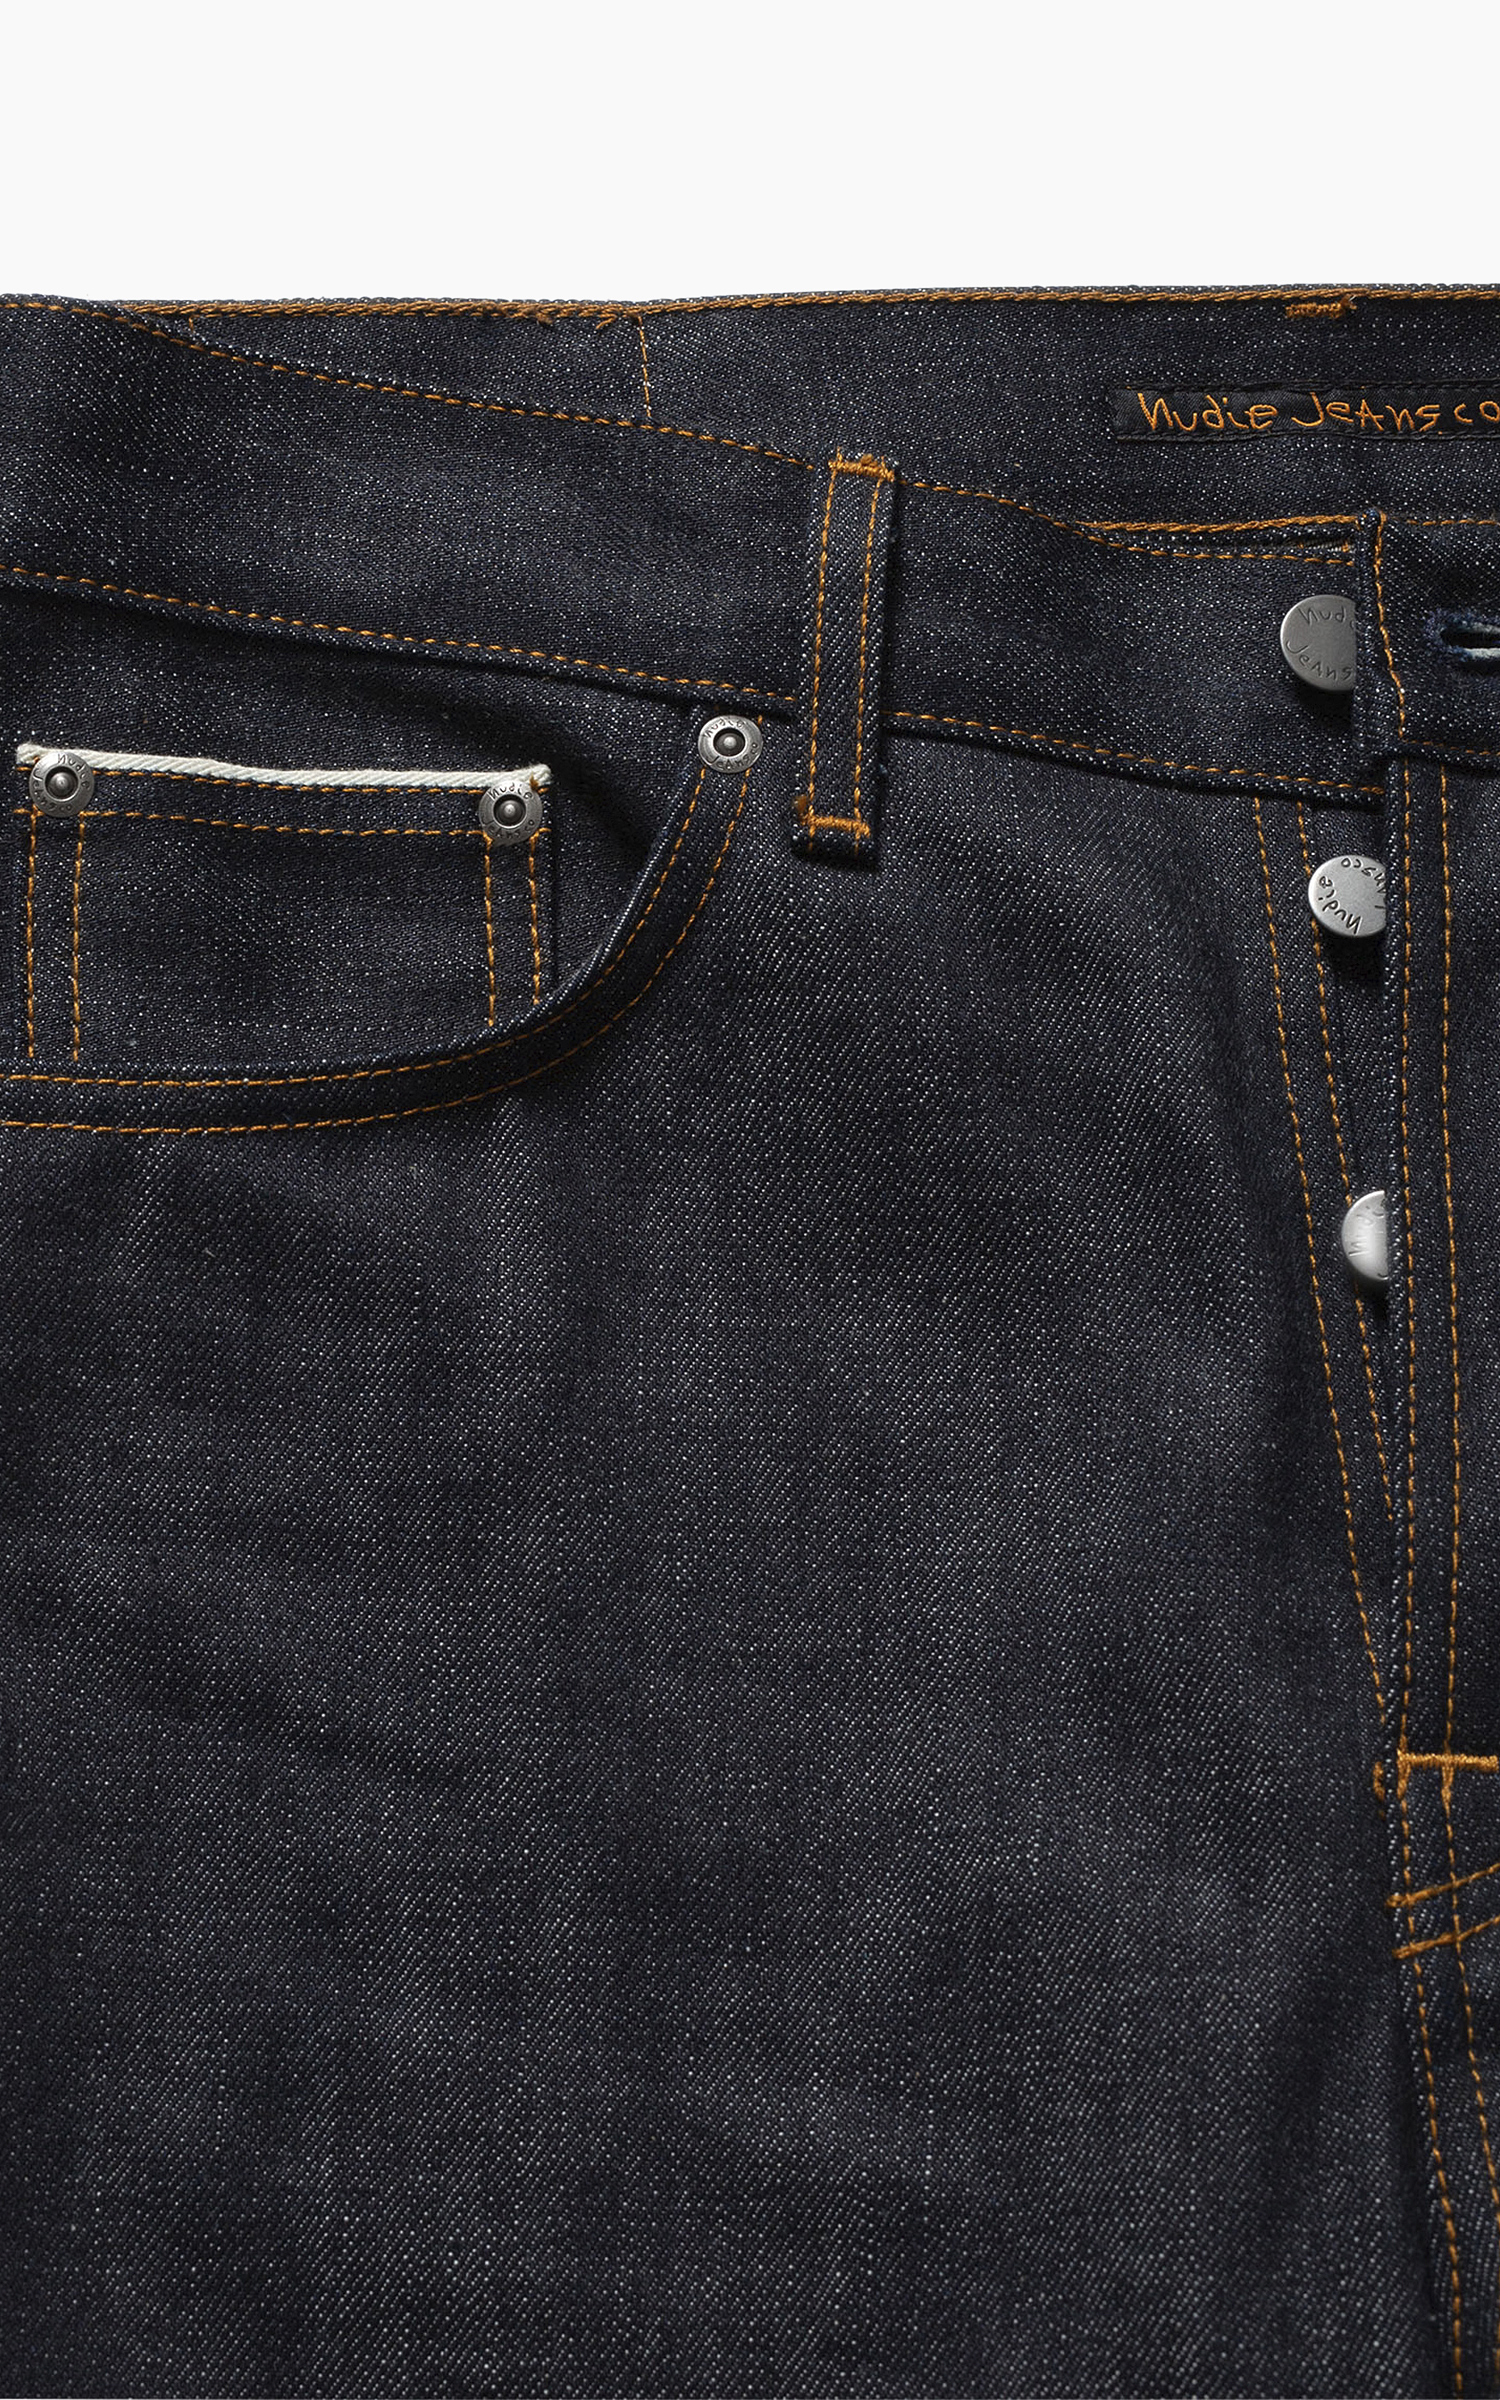 Nudie Jeans Tuff Tony Dry Ruby Selvage | Cultizm